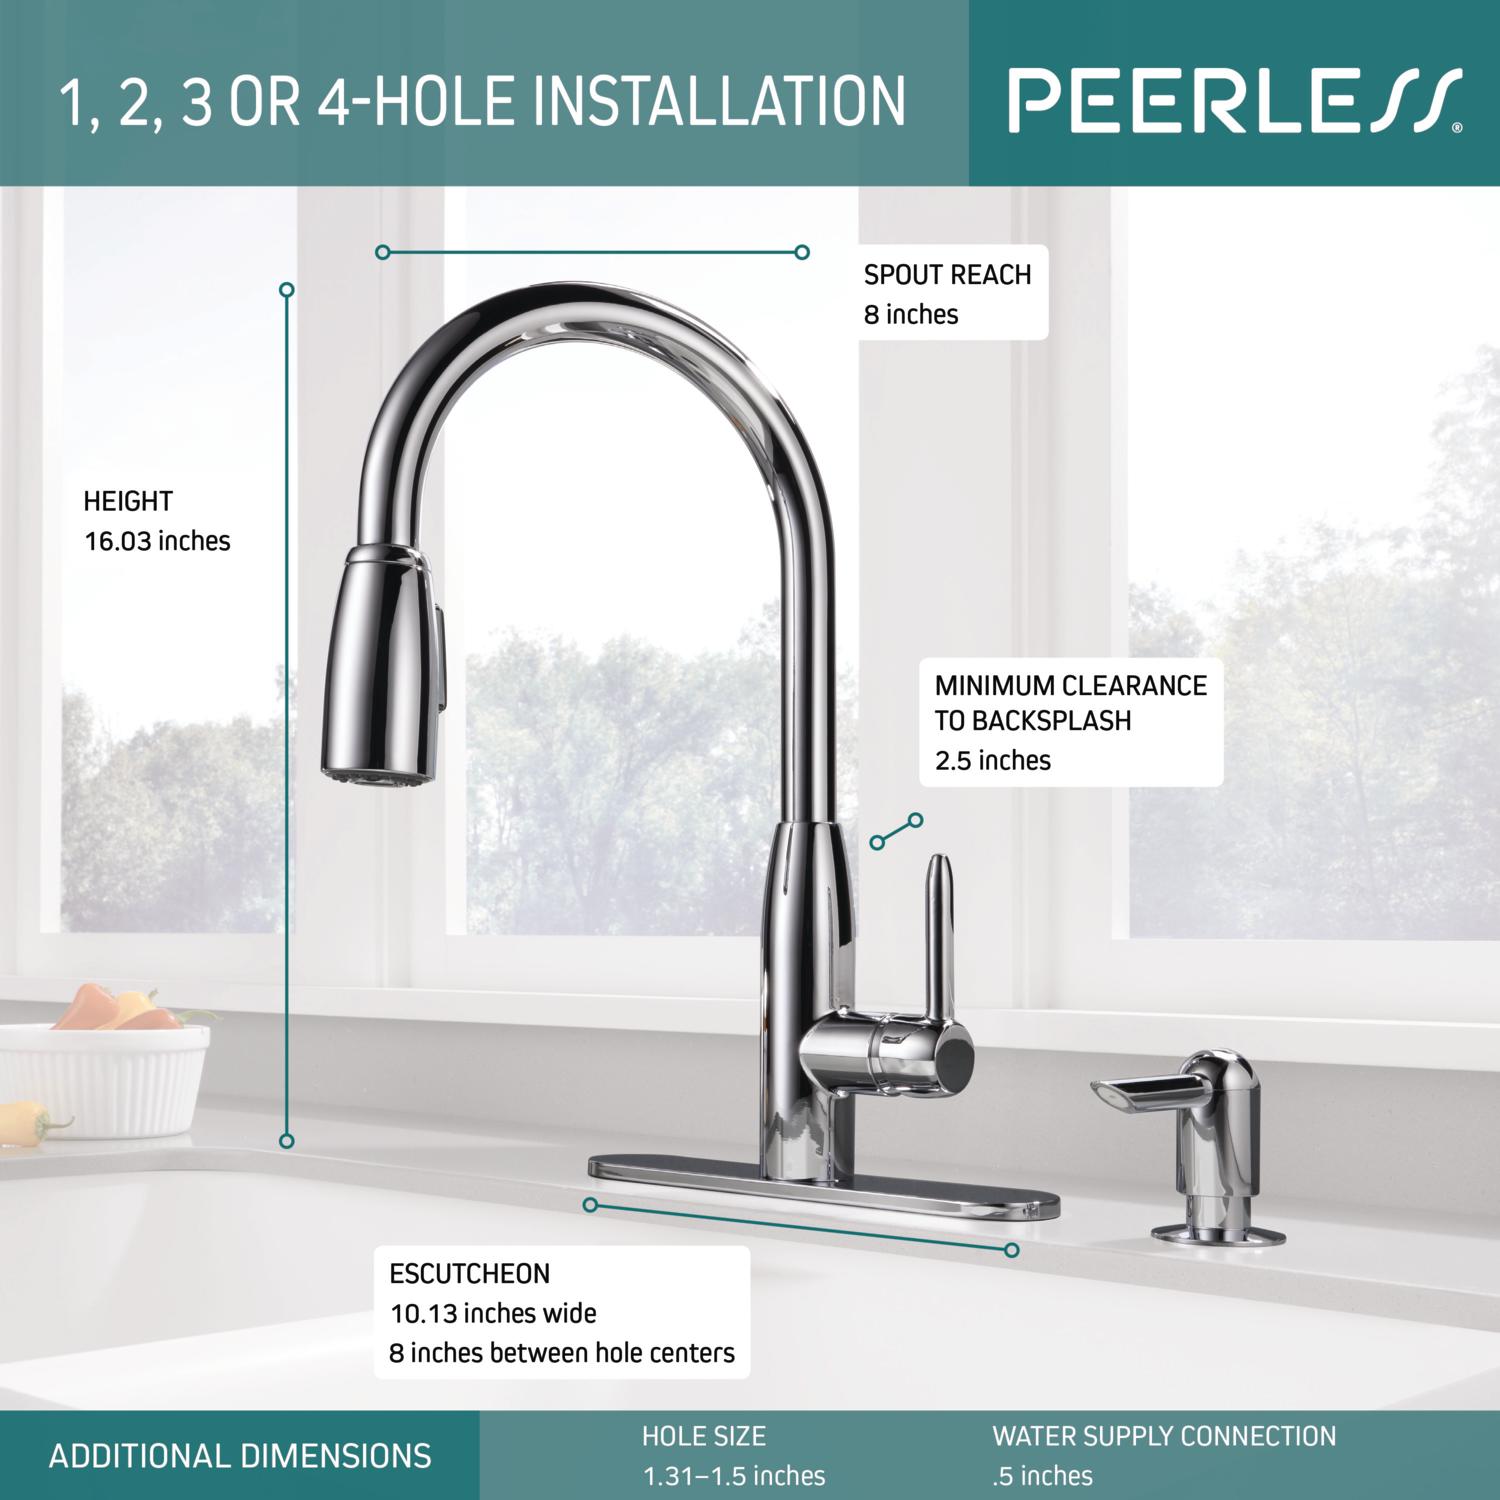 Peerless Core Kitchen Single Handle Pull-Down Faucet in Chrome P88103LF-SD-L - image 7 of 11